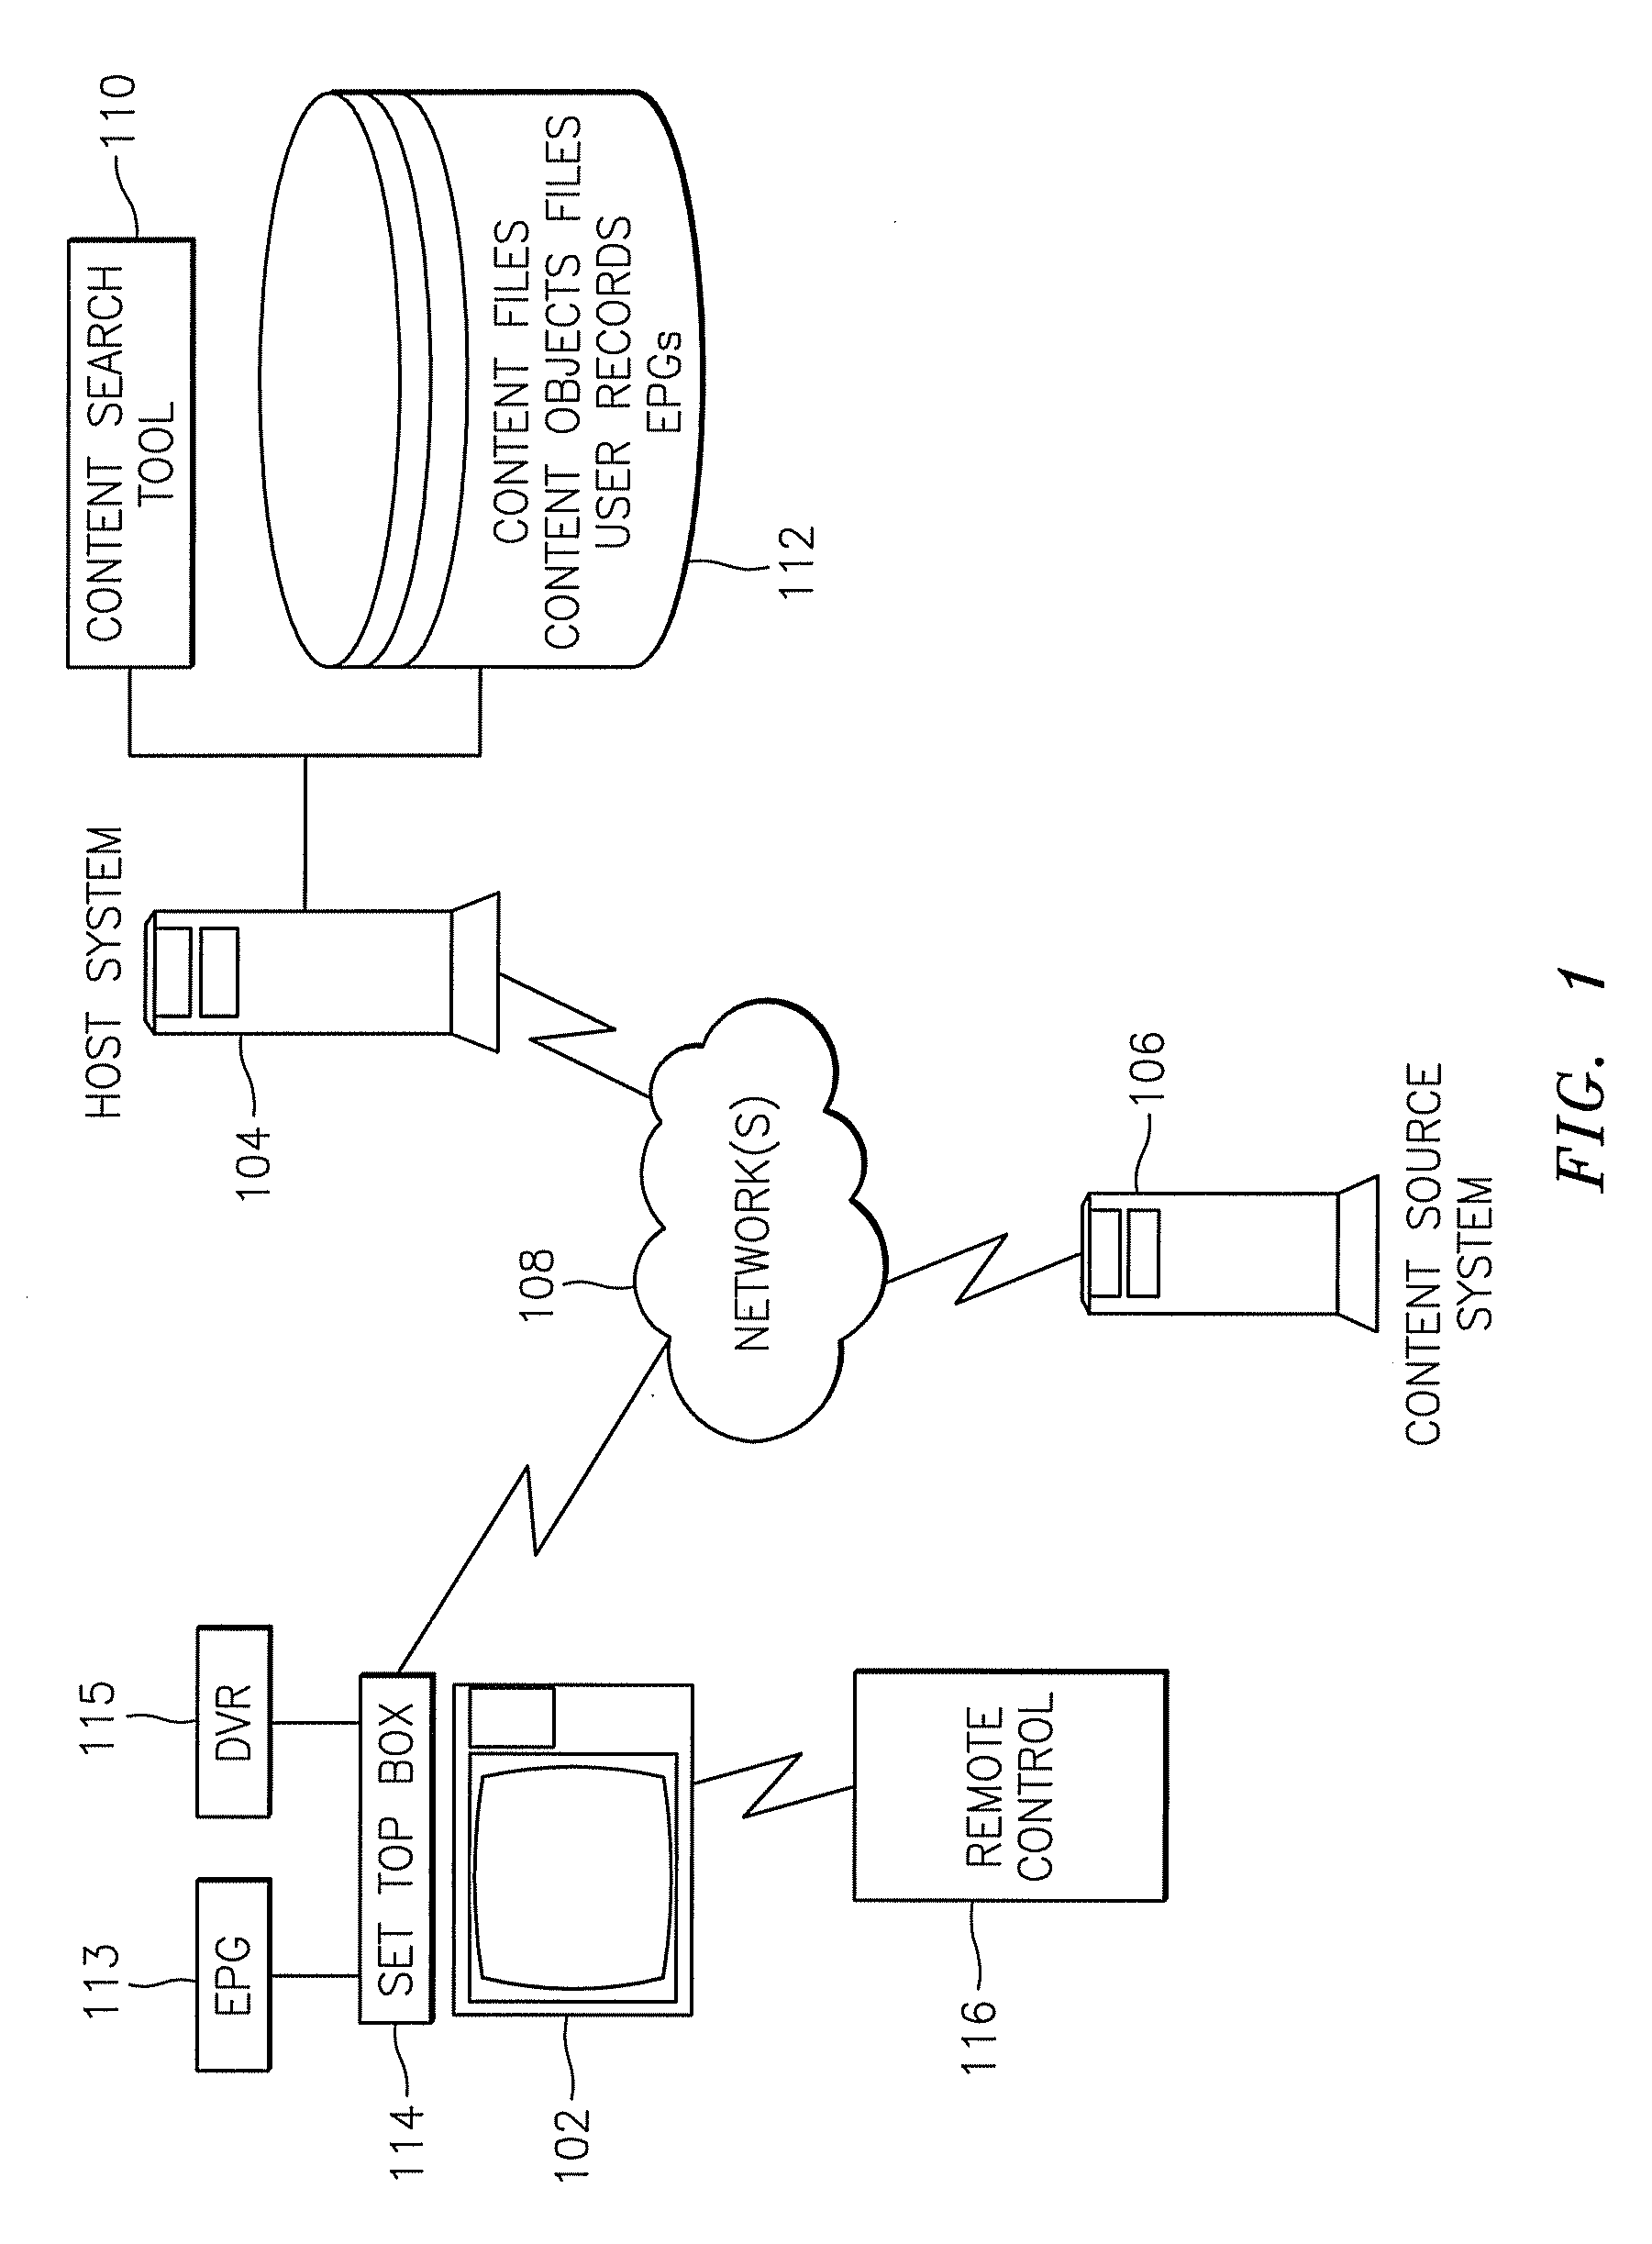 Methods, systems, and computer program products for implementing a navigational search structure for media content